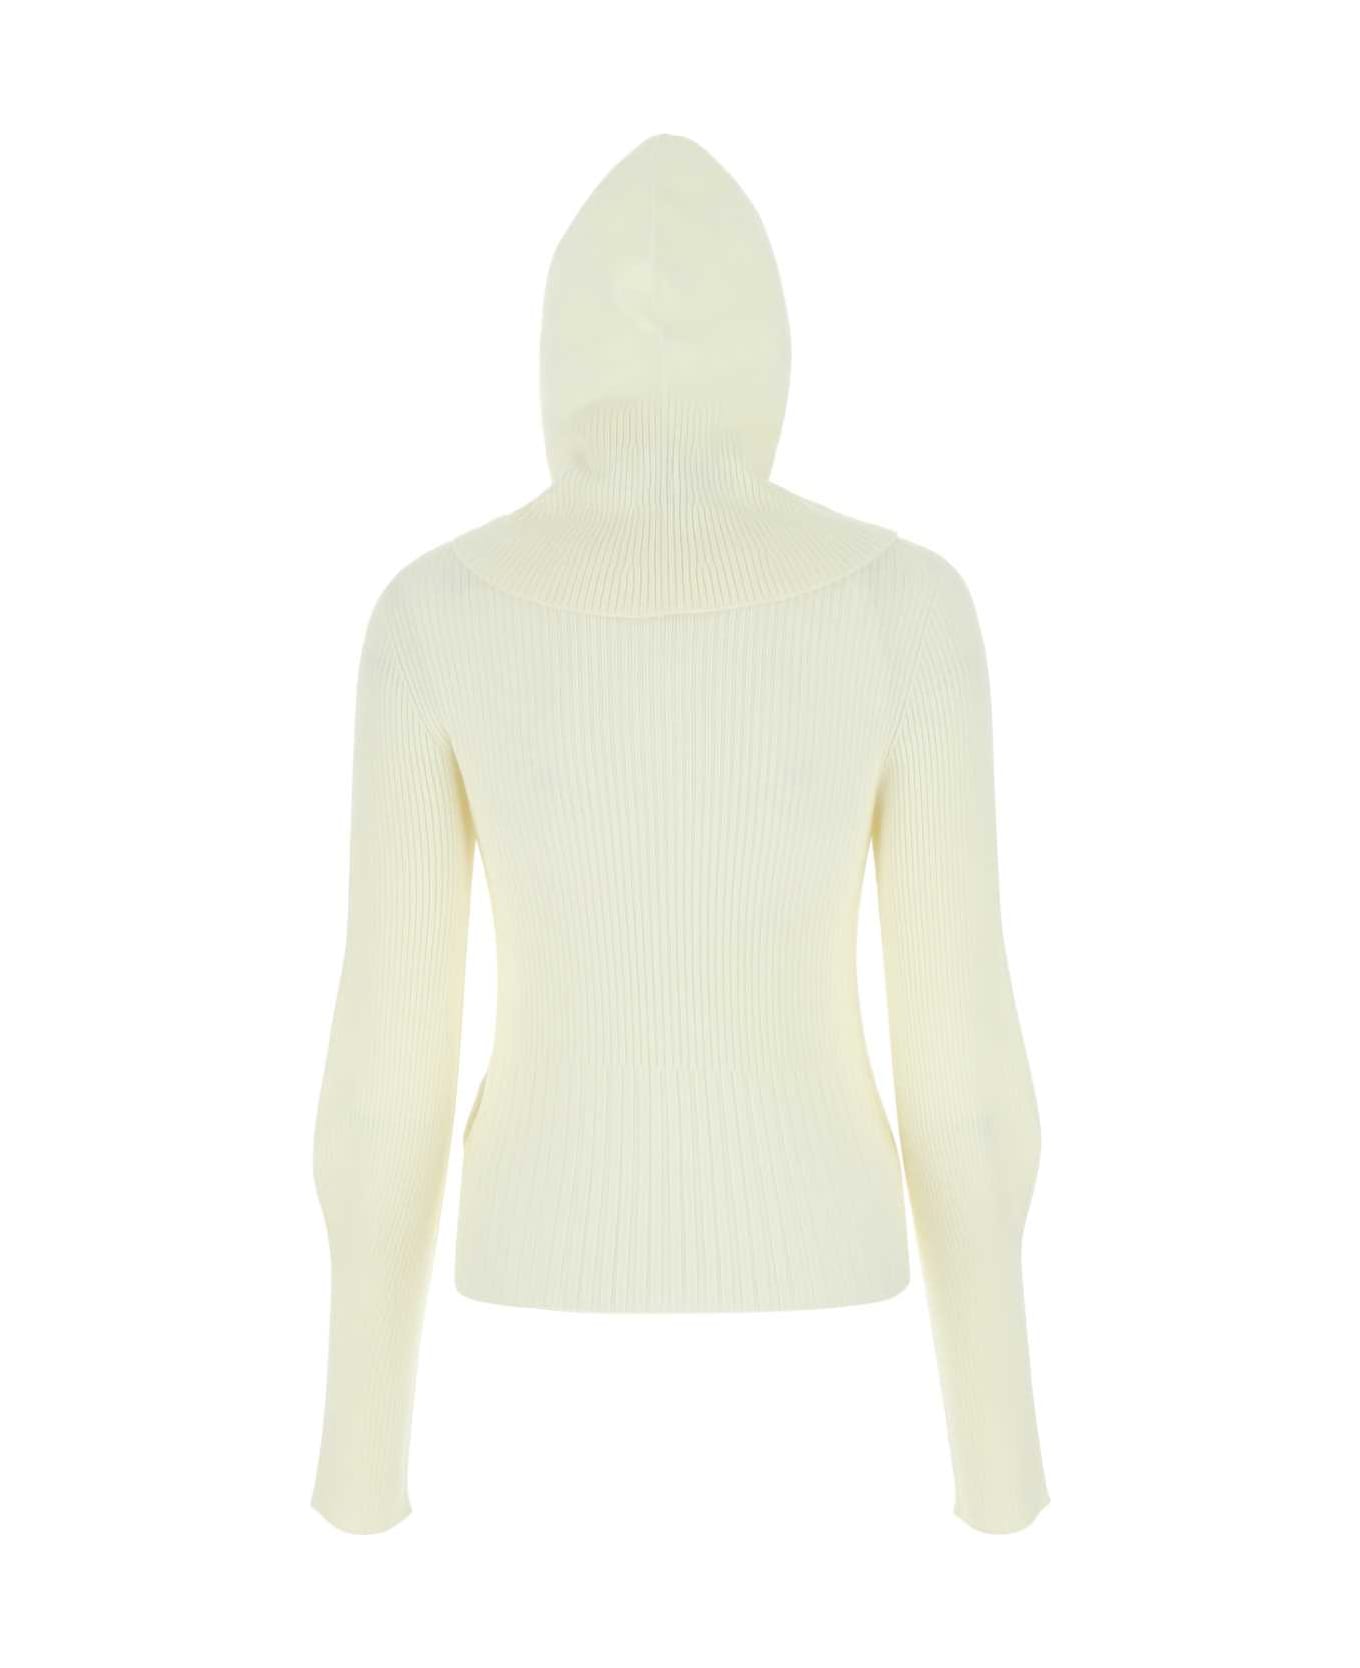 Low Classic Ivory Wool Sweater - 0060